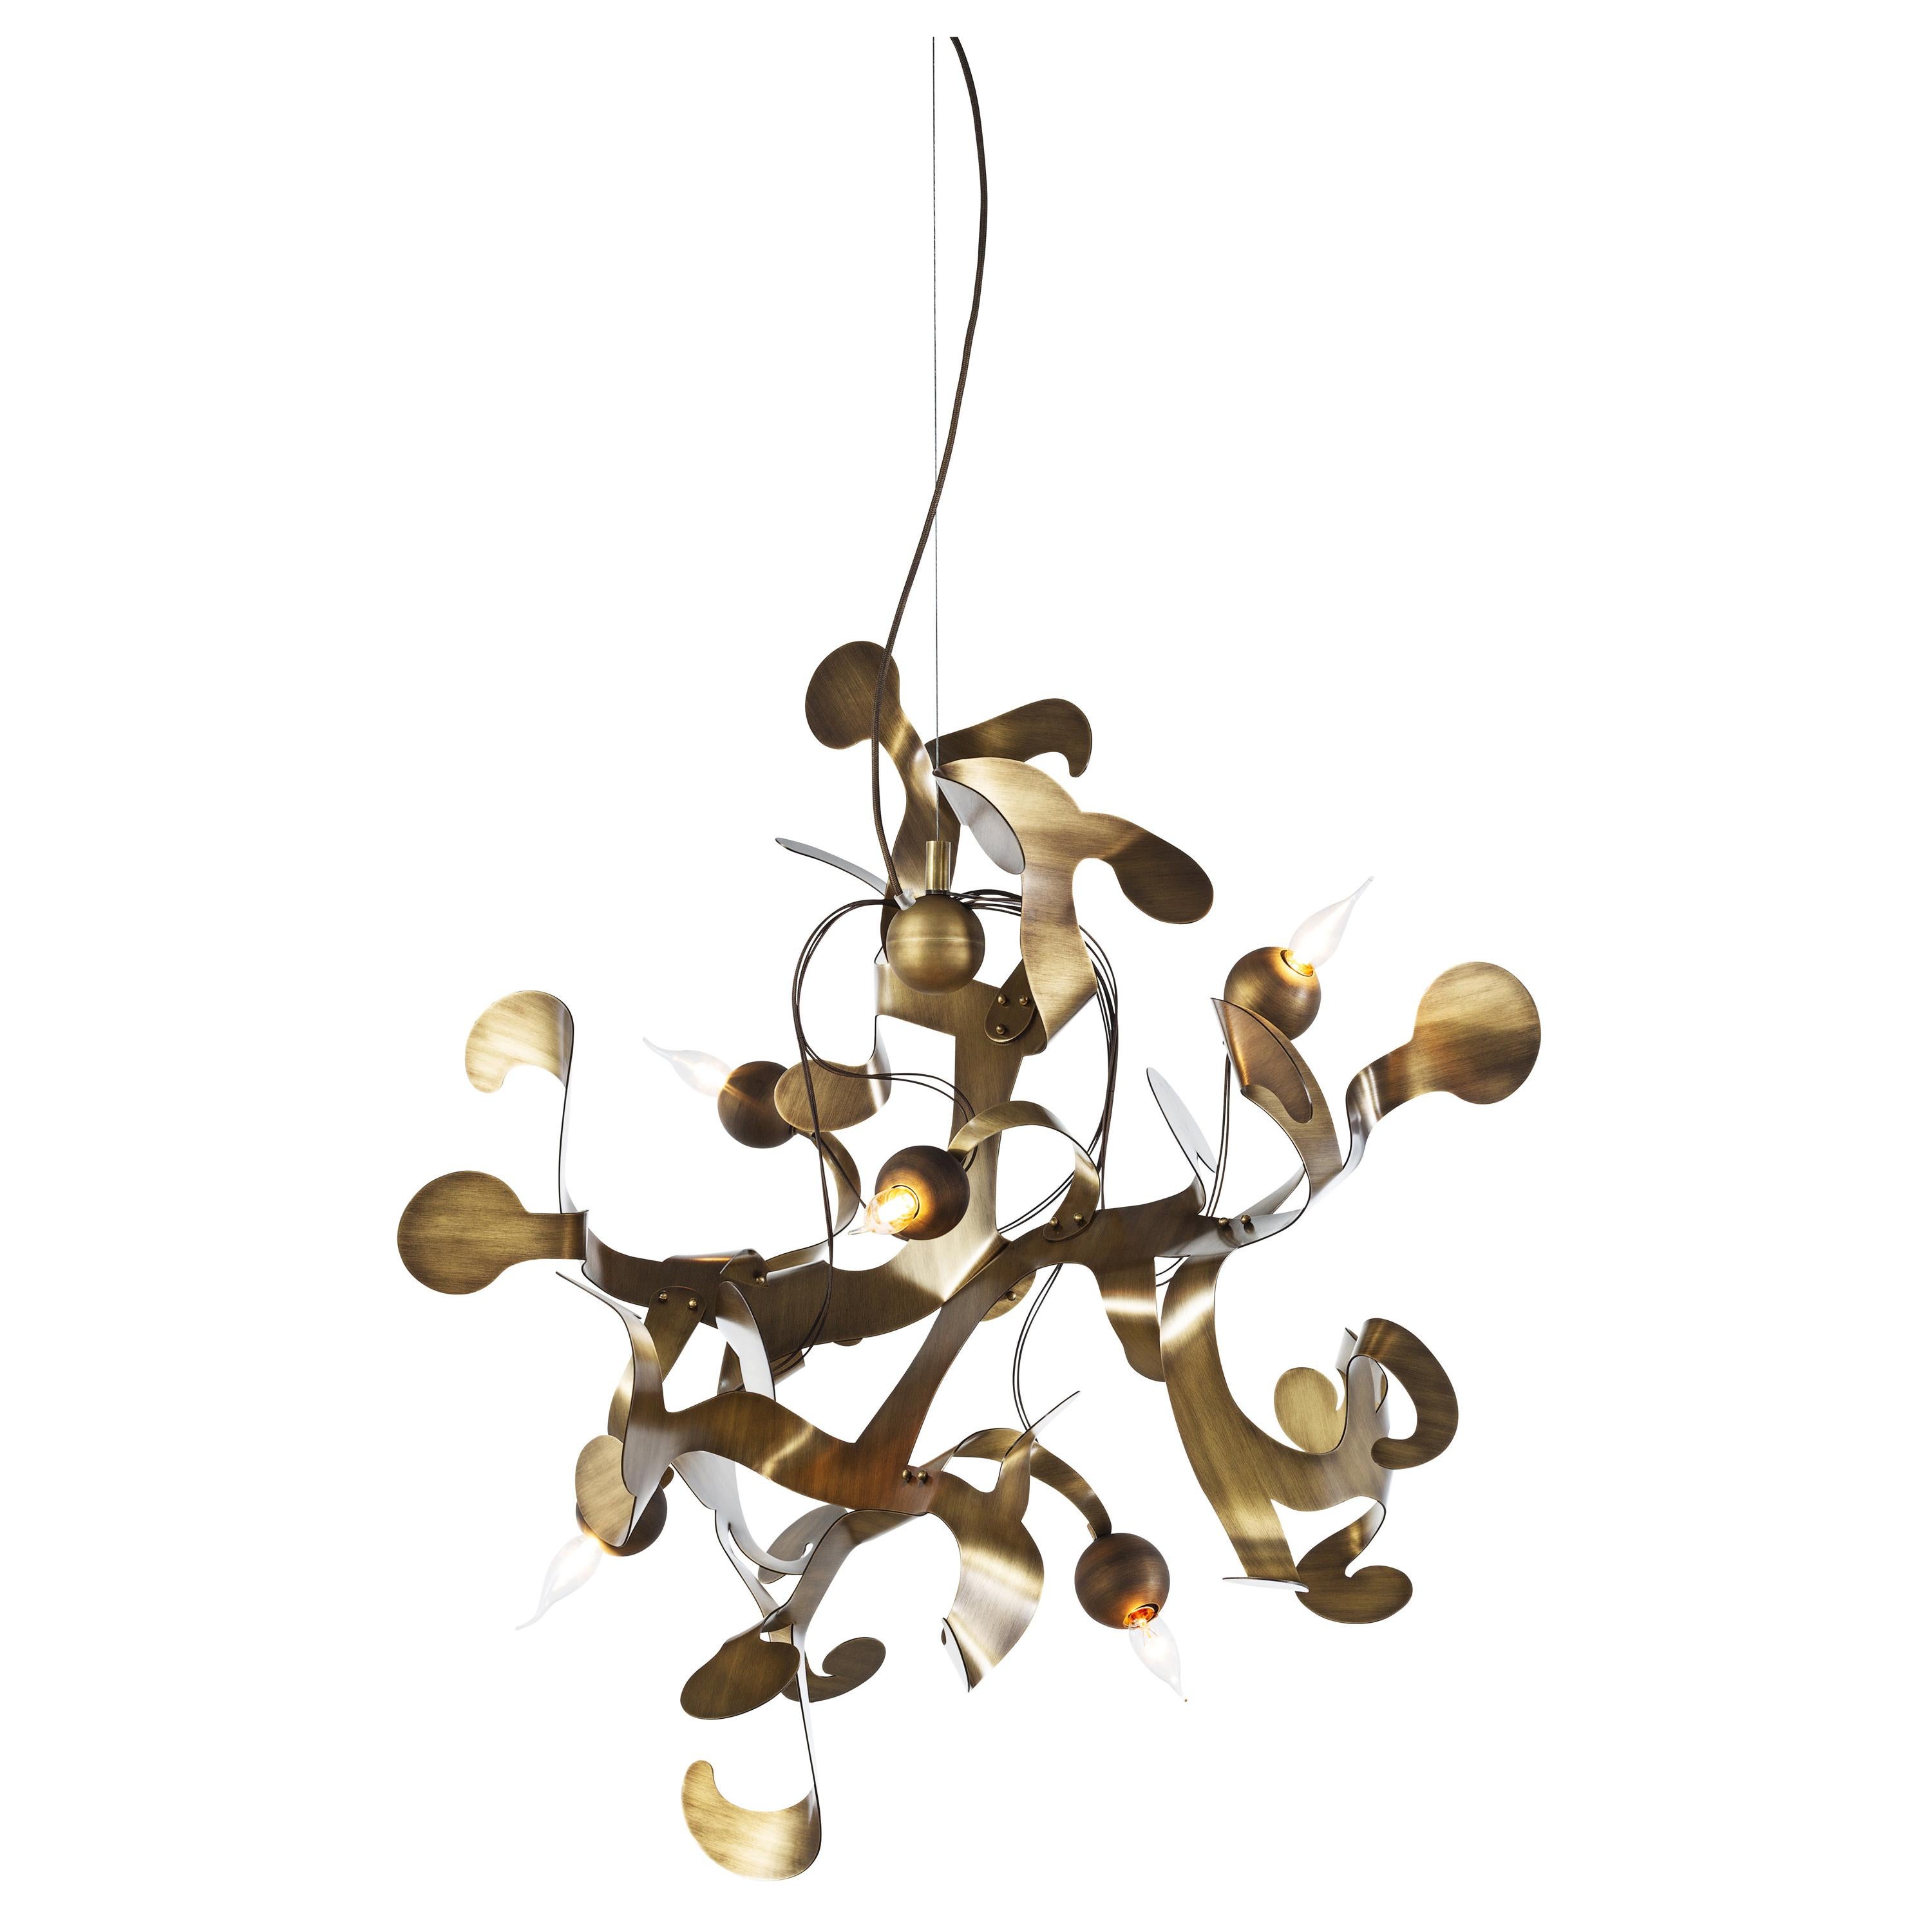 Modern Pendant in a Brass Aged Finish, Kelp Collection, by Brand van Egmond For Sale